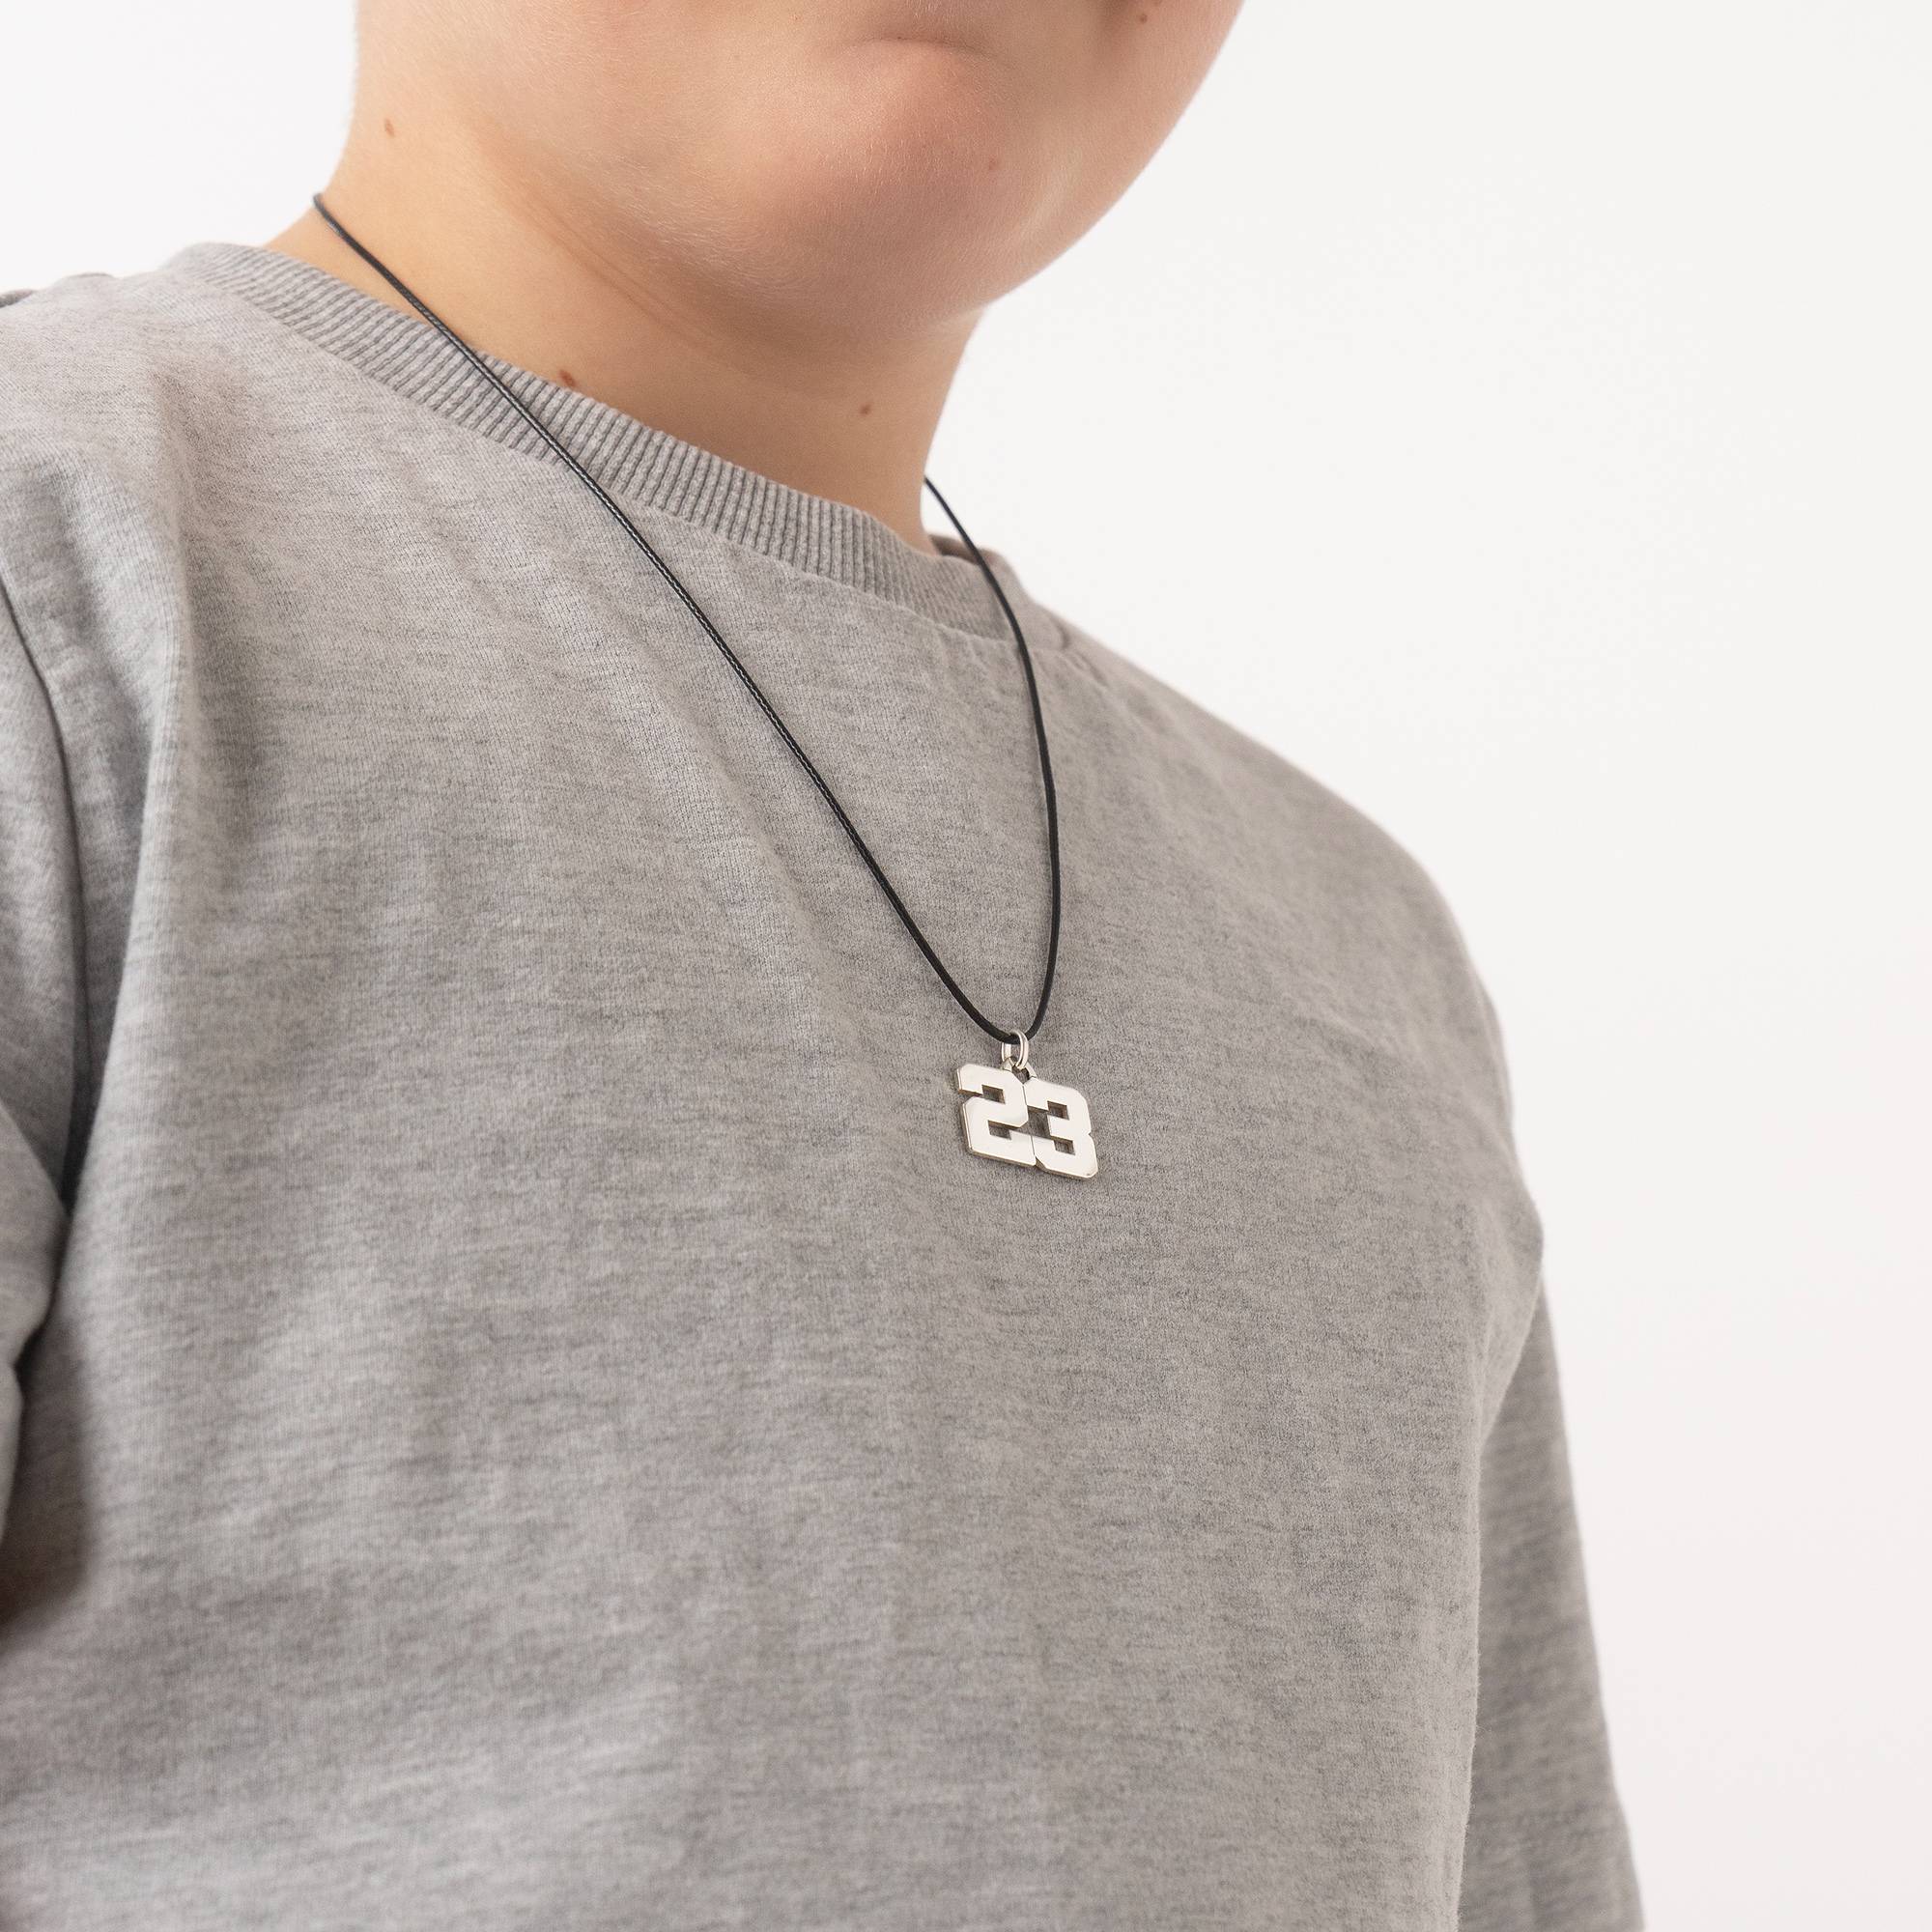 Boys Team / Player Number Necklace in Sterling Silver-3 product photo